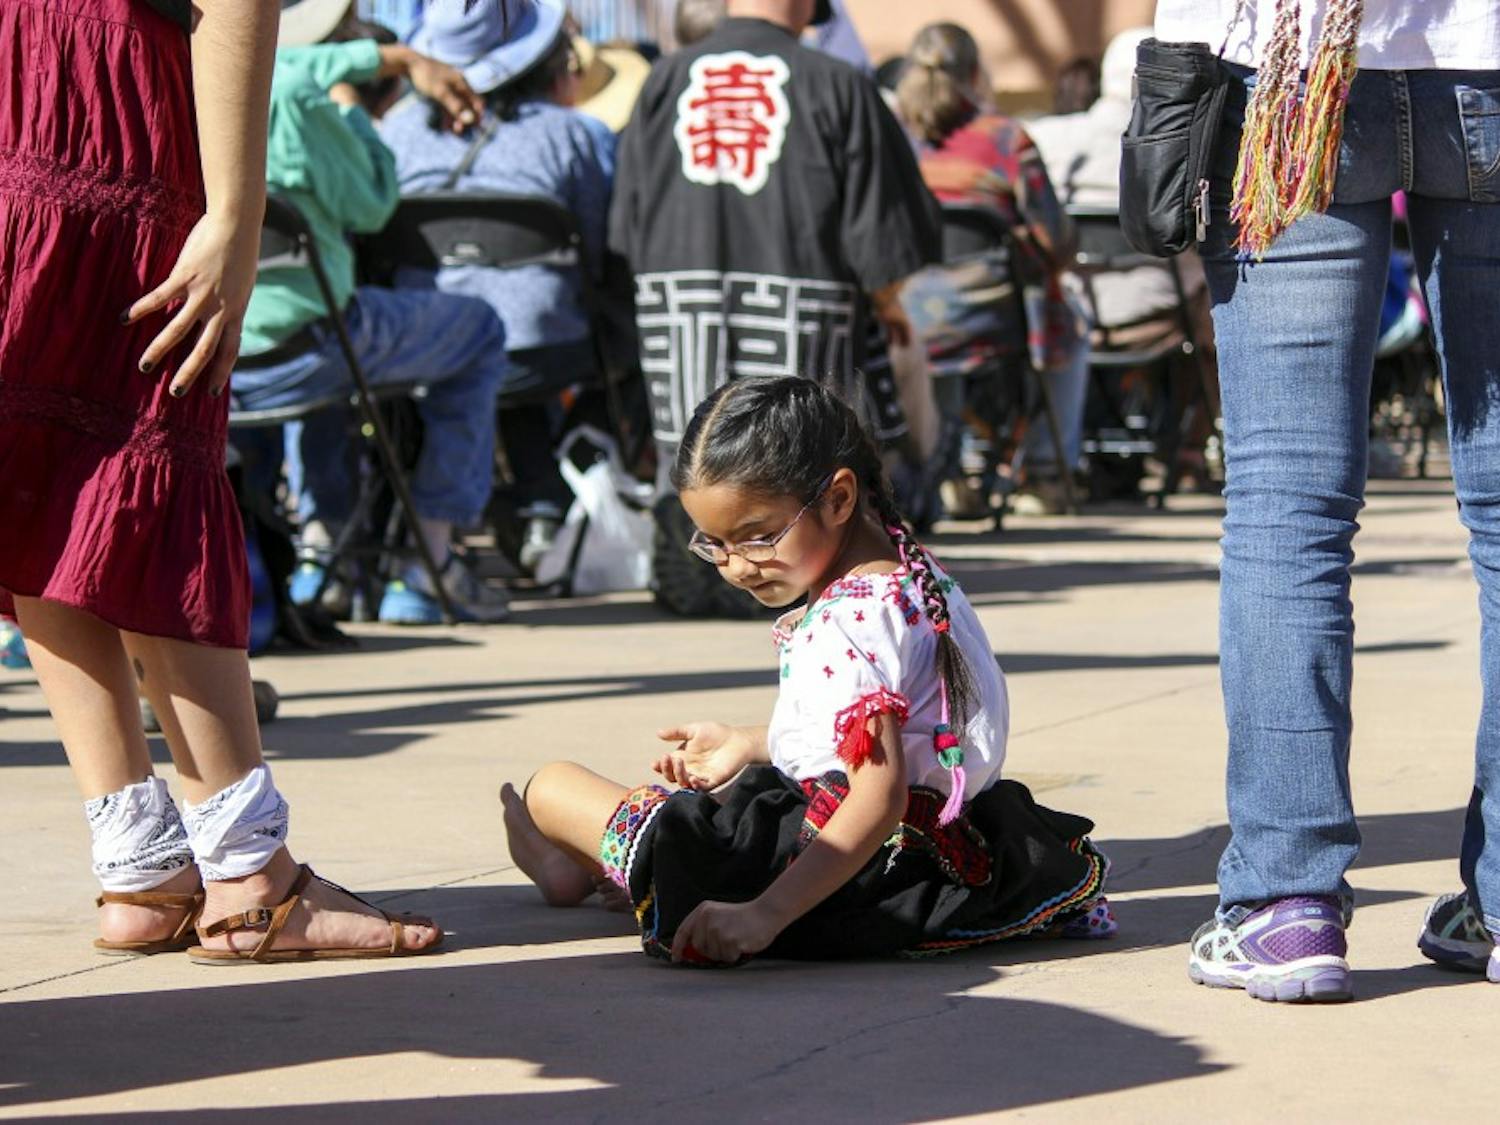 Mari-Fer Straits, age 6, writes on the floor during the anti violence rally on Sunday afternoon at the Civic Plaza. Straits, was one of the four Aztec dance performers from Circulo Solar Ollin Xochipilli that performed at the rally.